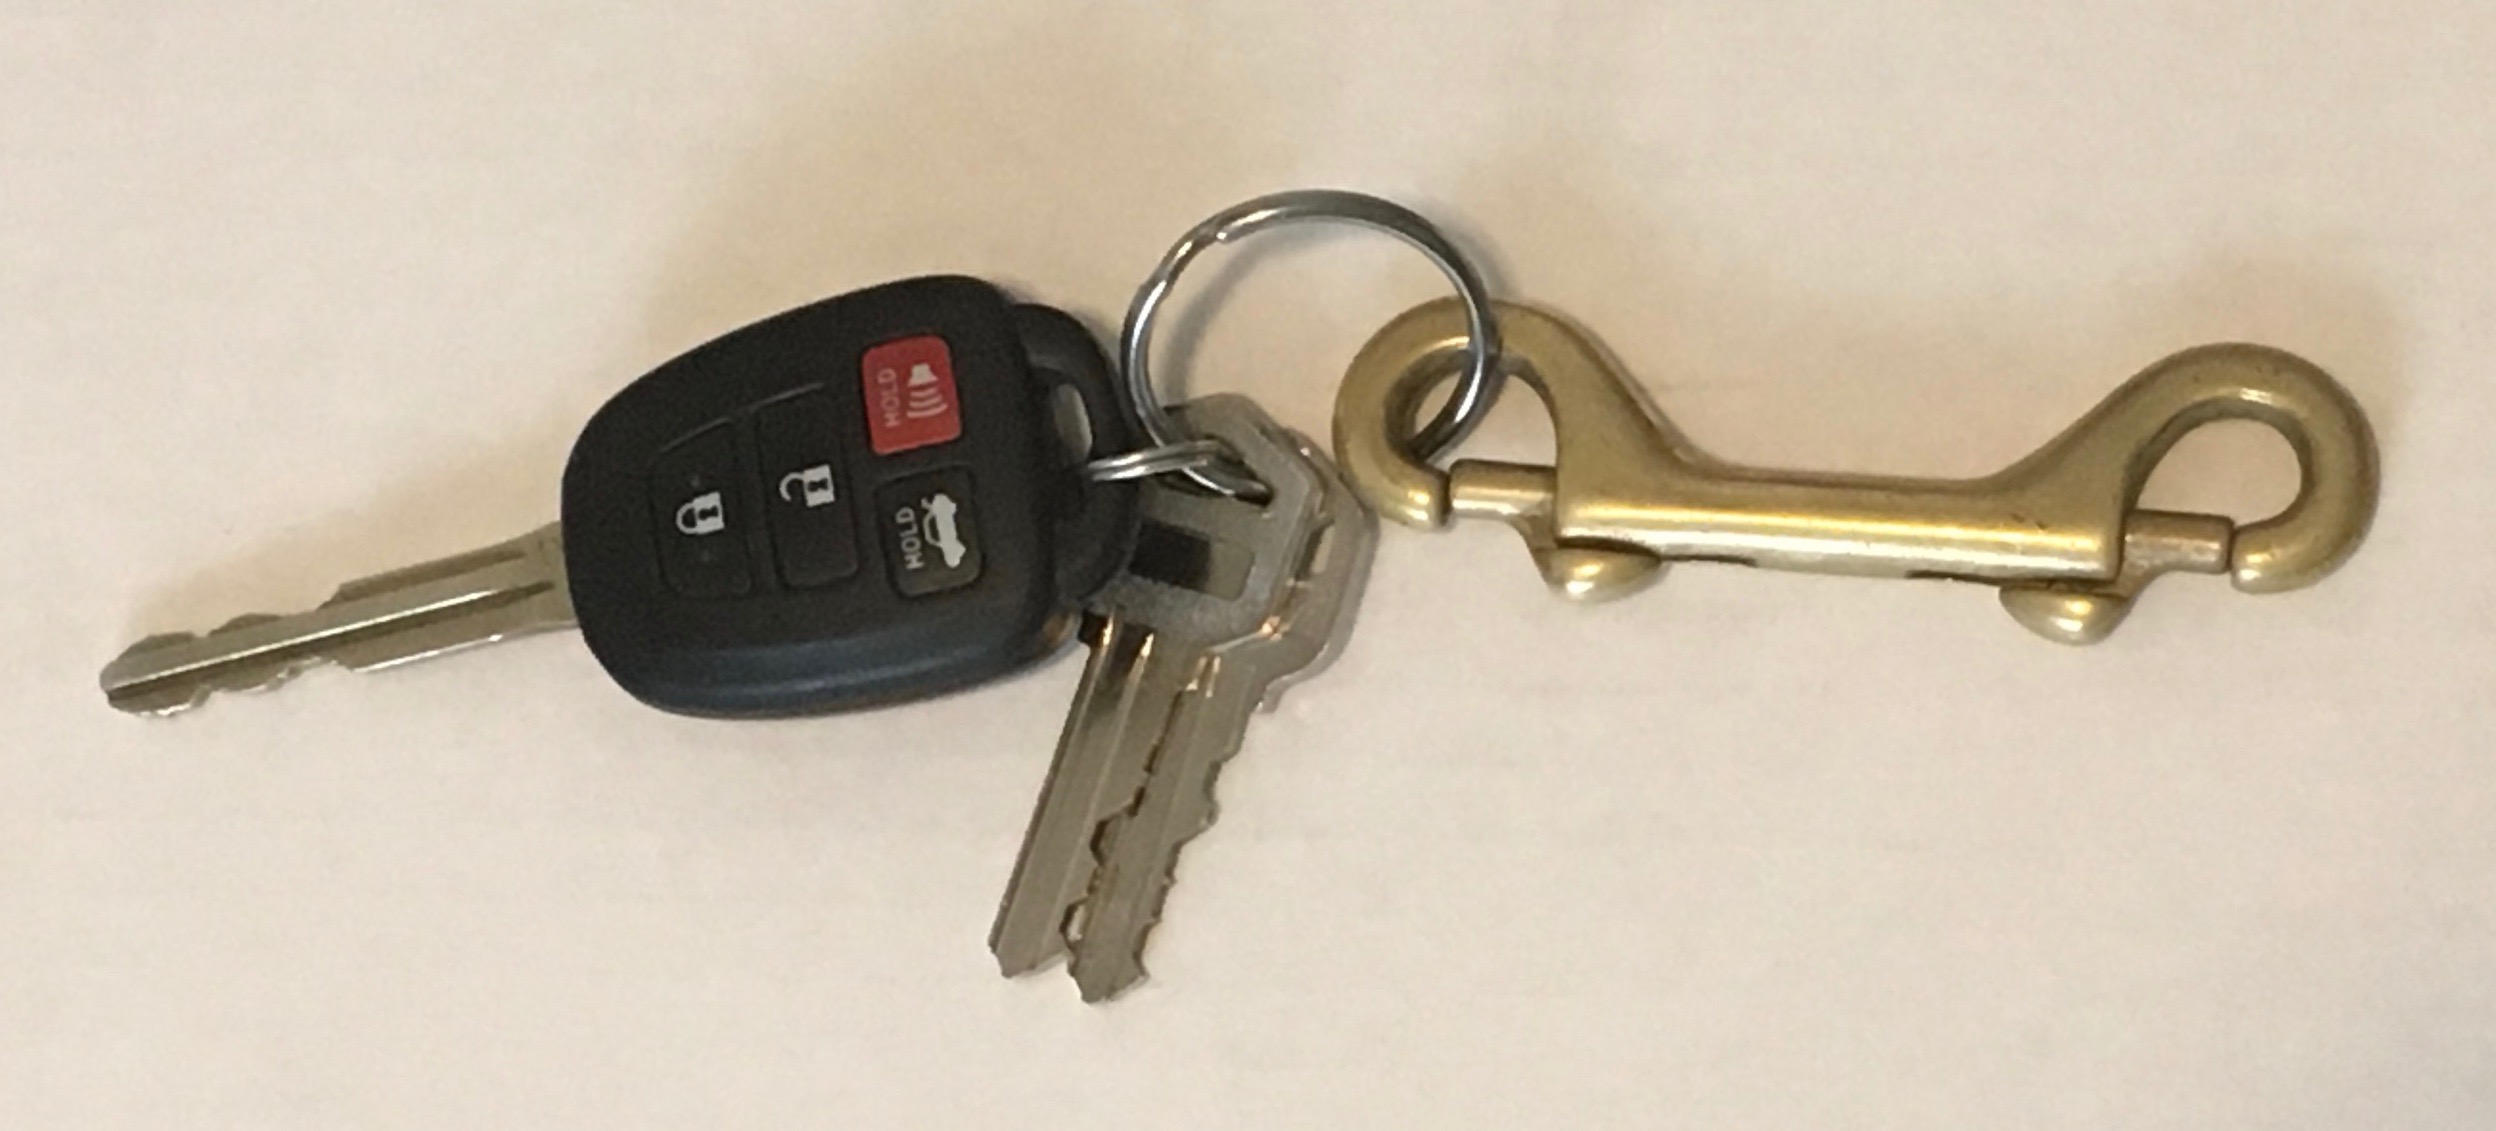 double-ended-snap-clip—with-personal-keys.jpg